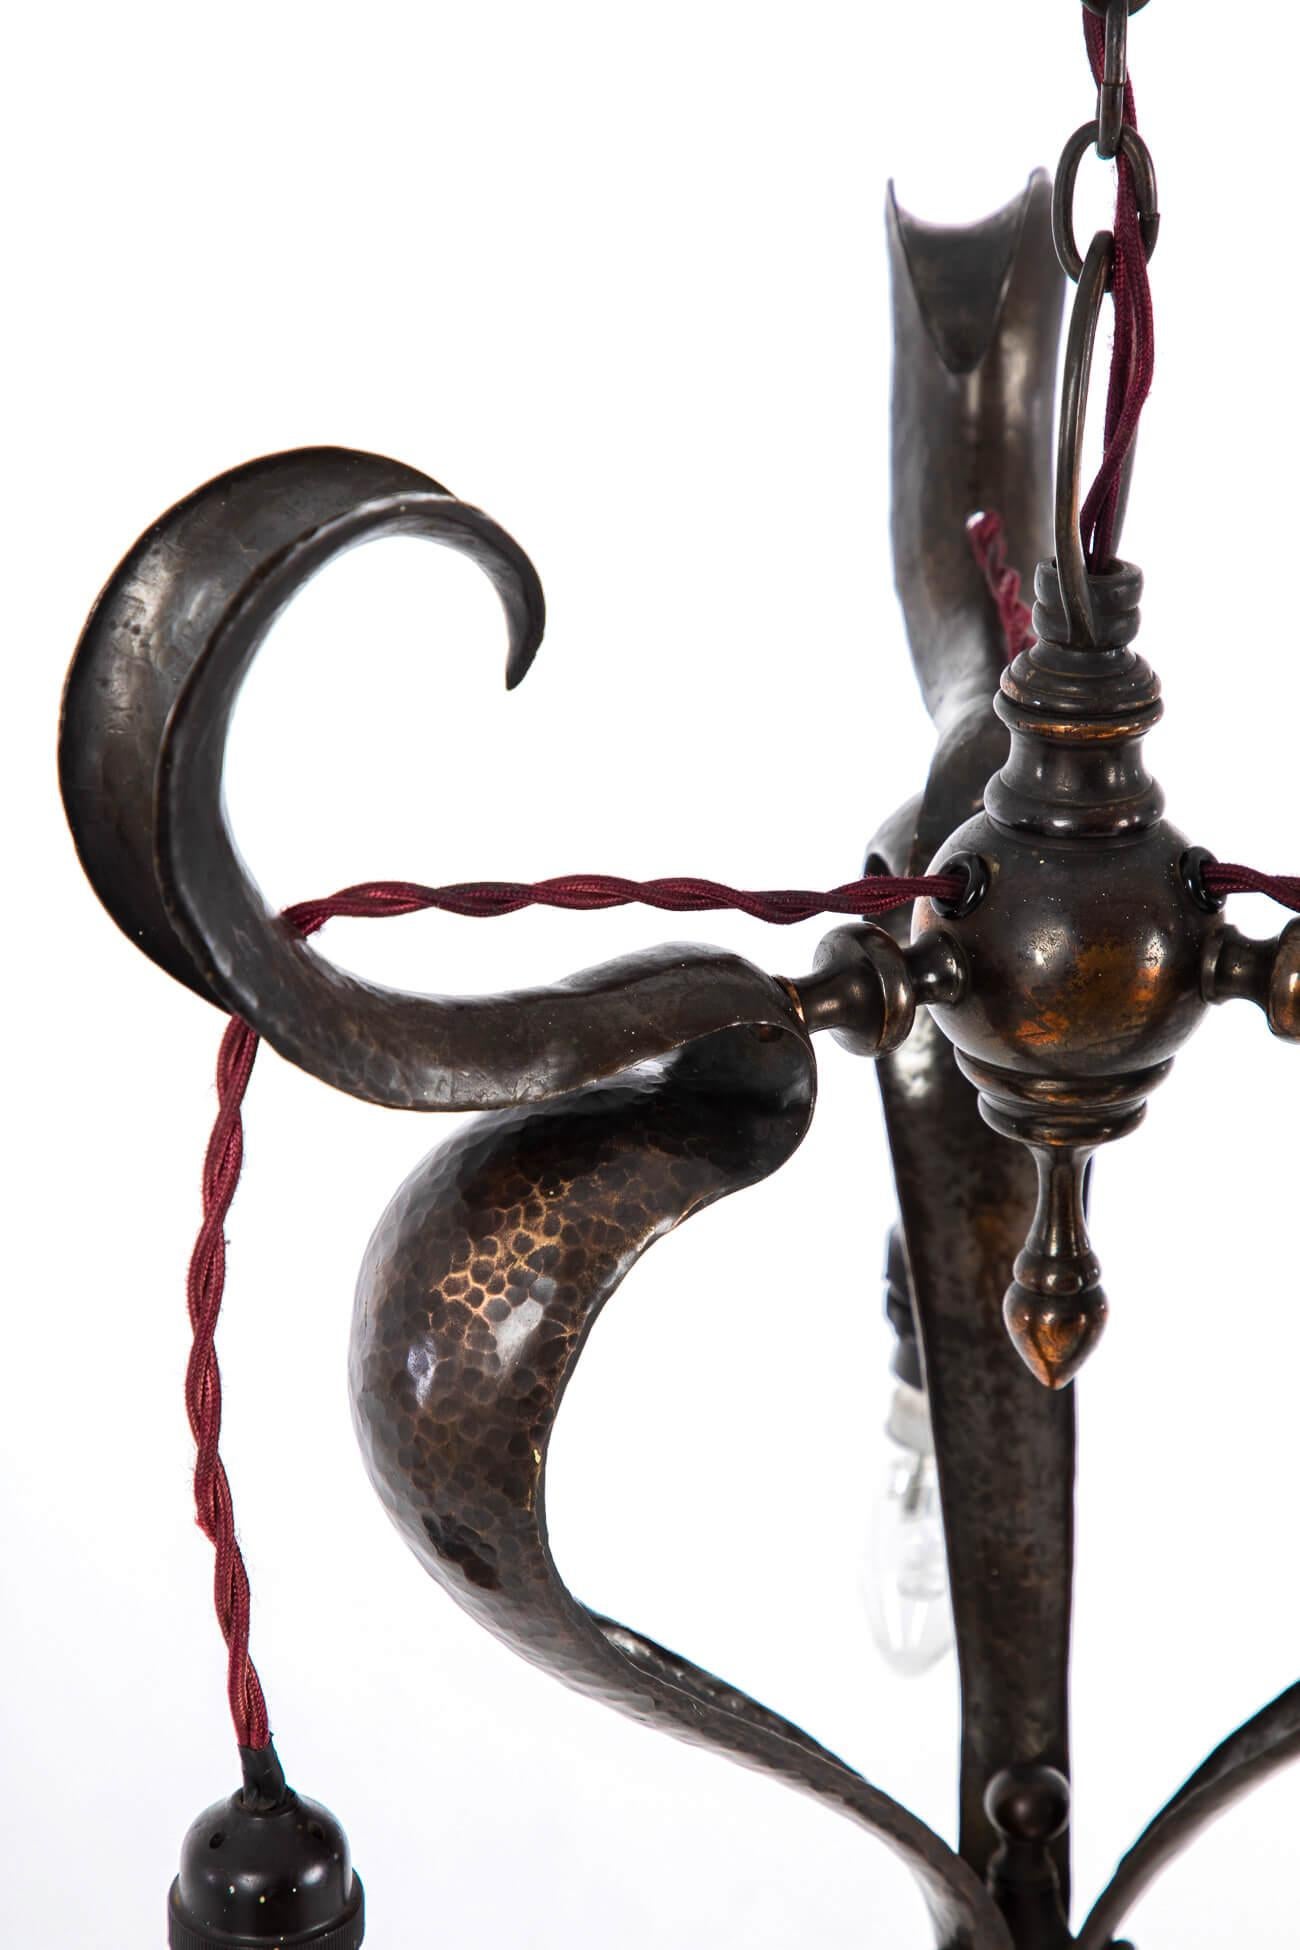 Copper mounted ceiling hook and rose above three bayonet light fittings. With elegant graceful lines highlighted by beautiful curved forms. 
British, circa 1900.

Additional information:
H 80 cm (H 31.4 inches)
W 34 cm (W 13.3 inches).